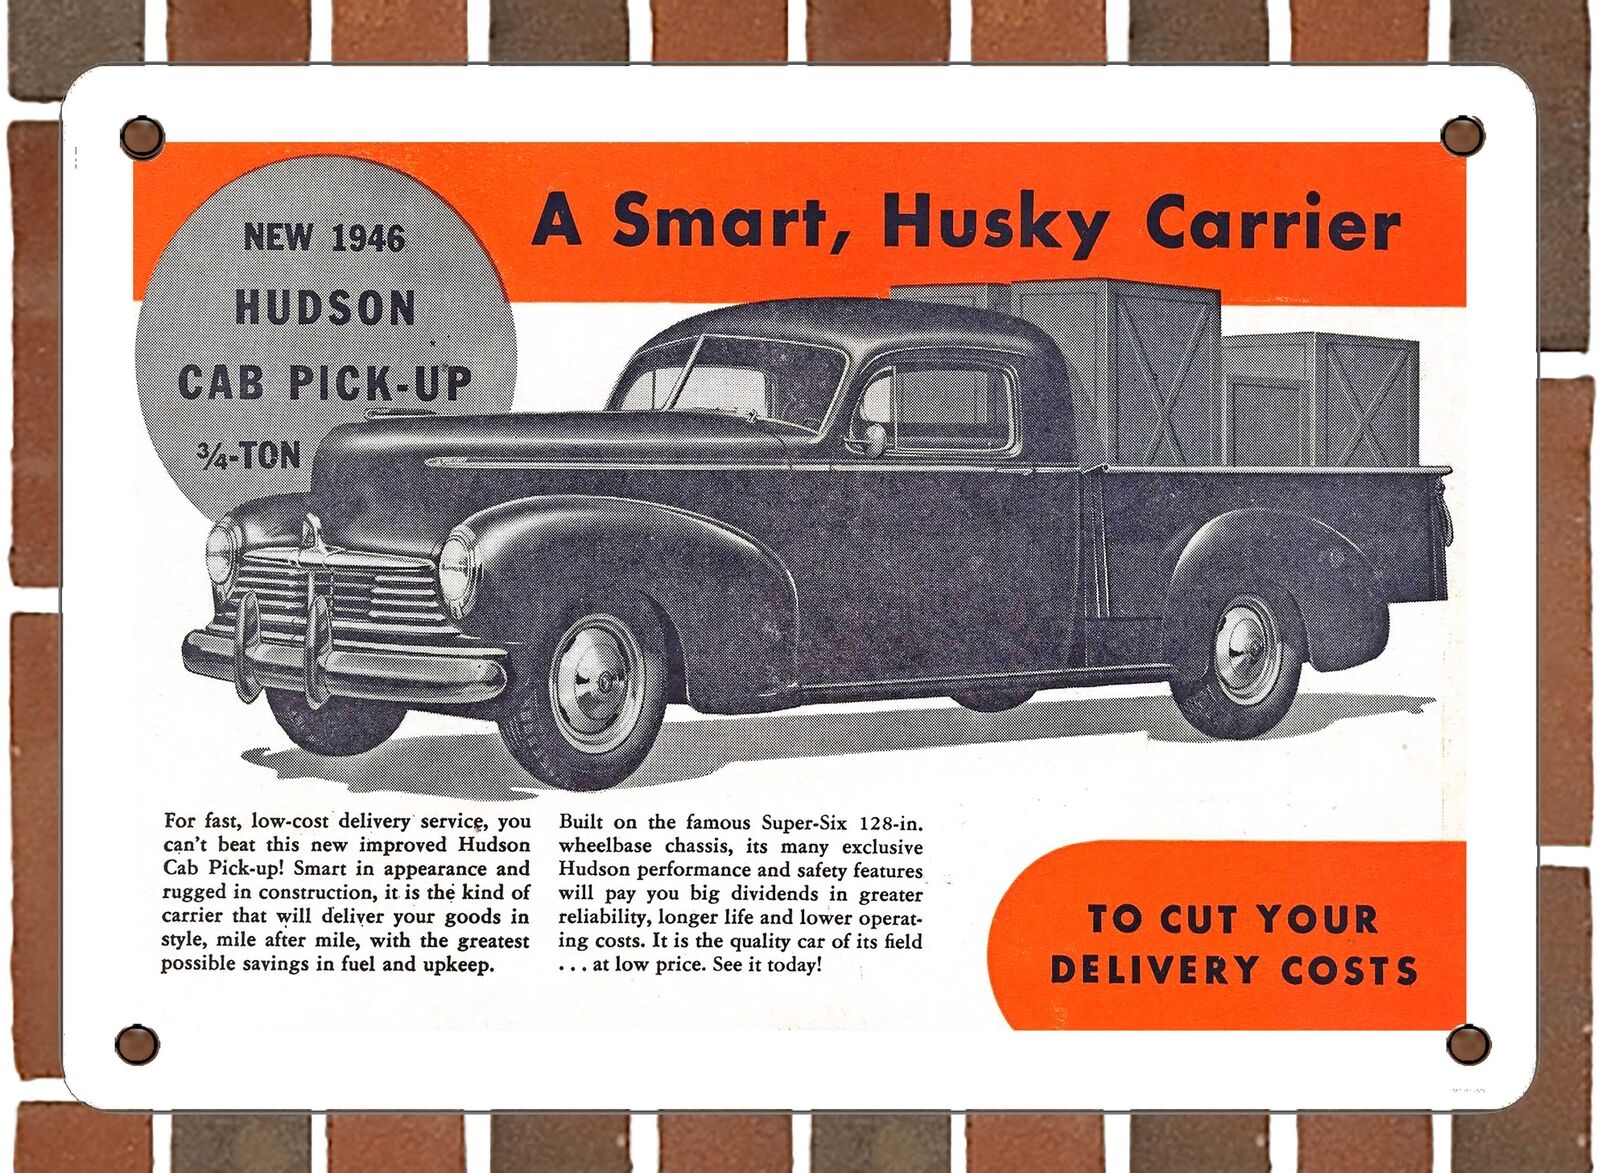 METAL SIGN - 1946 Hudson Cab Pick Up 2 - 10x14 Inches